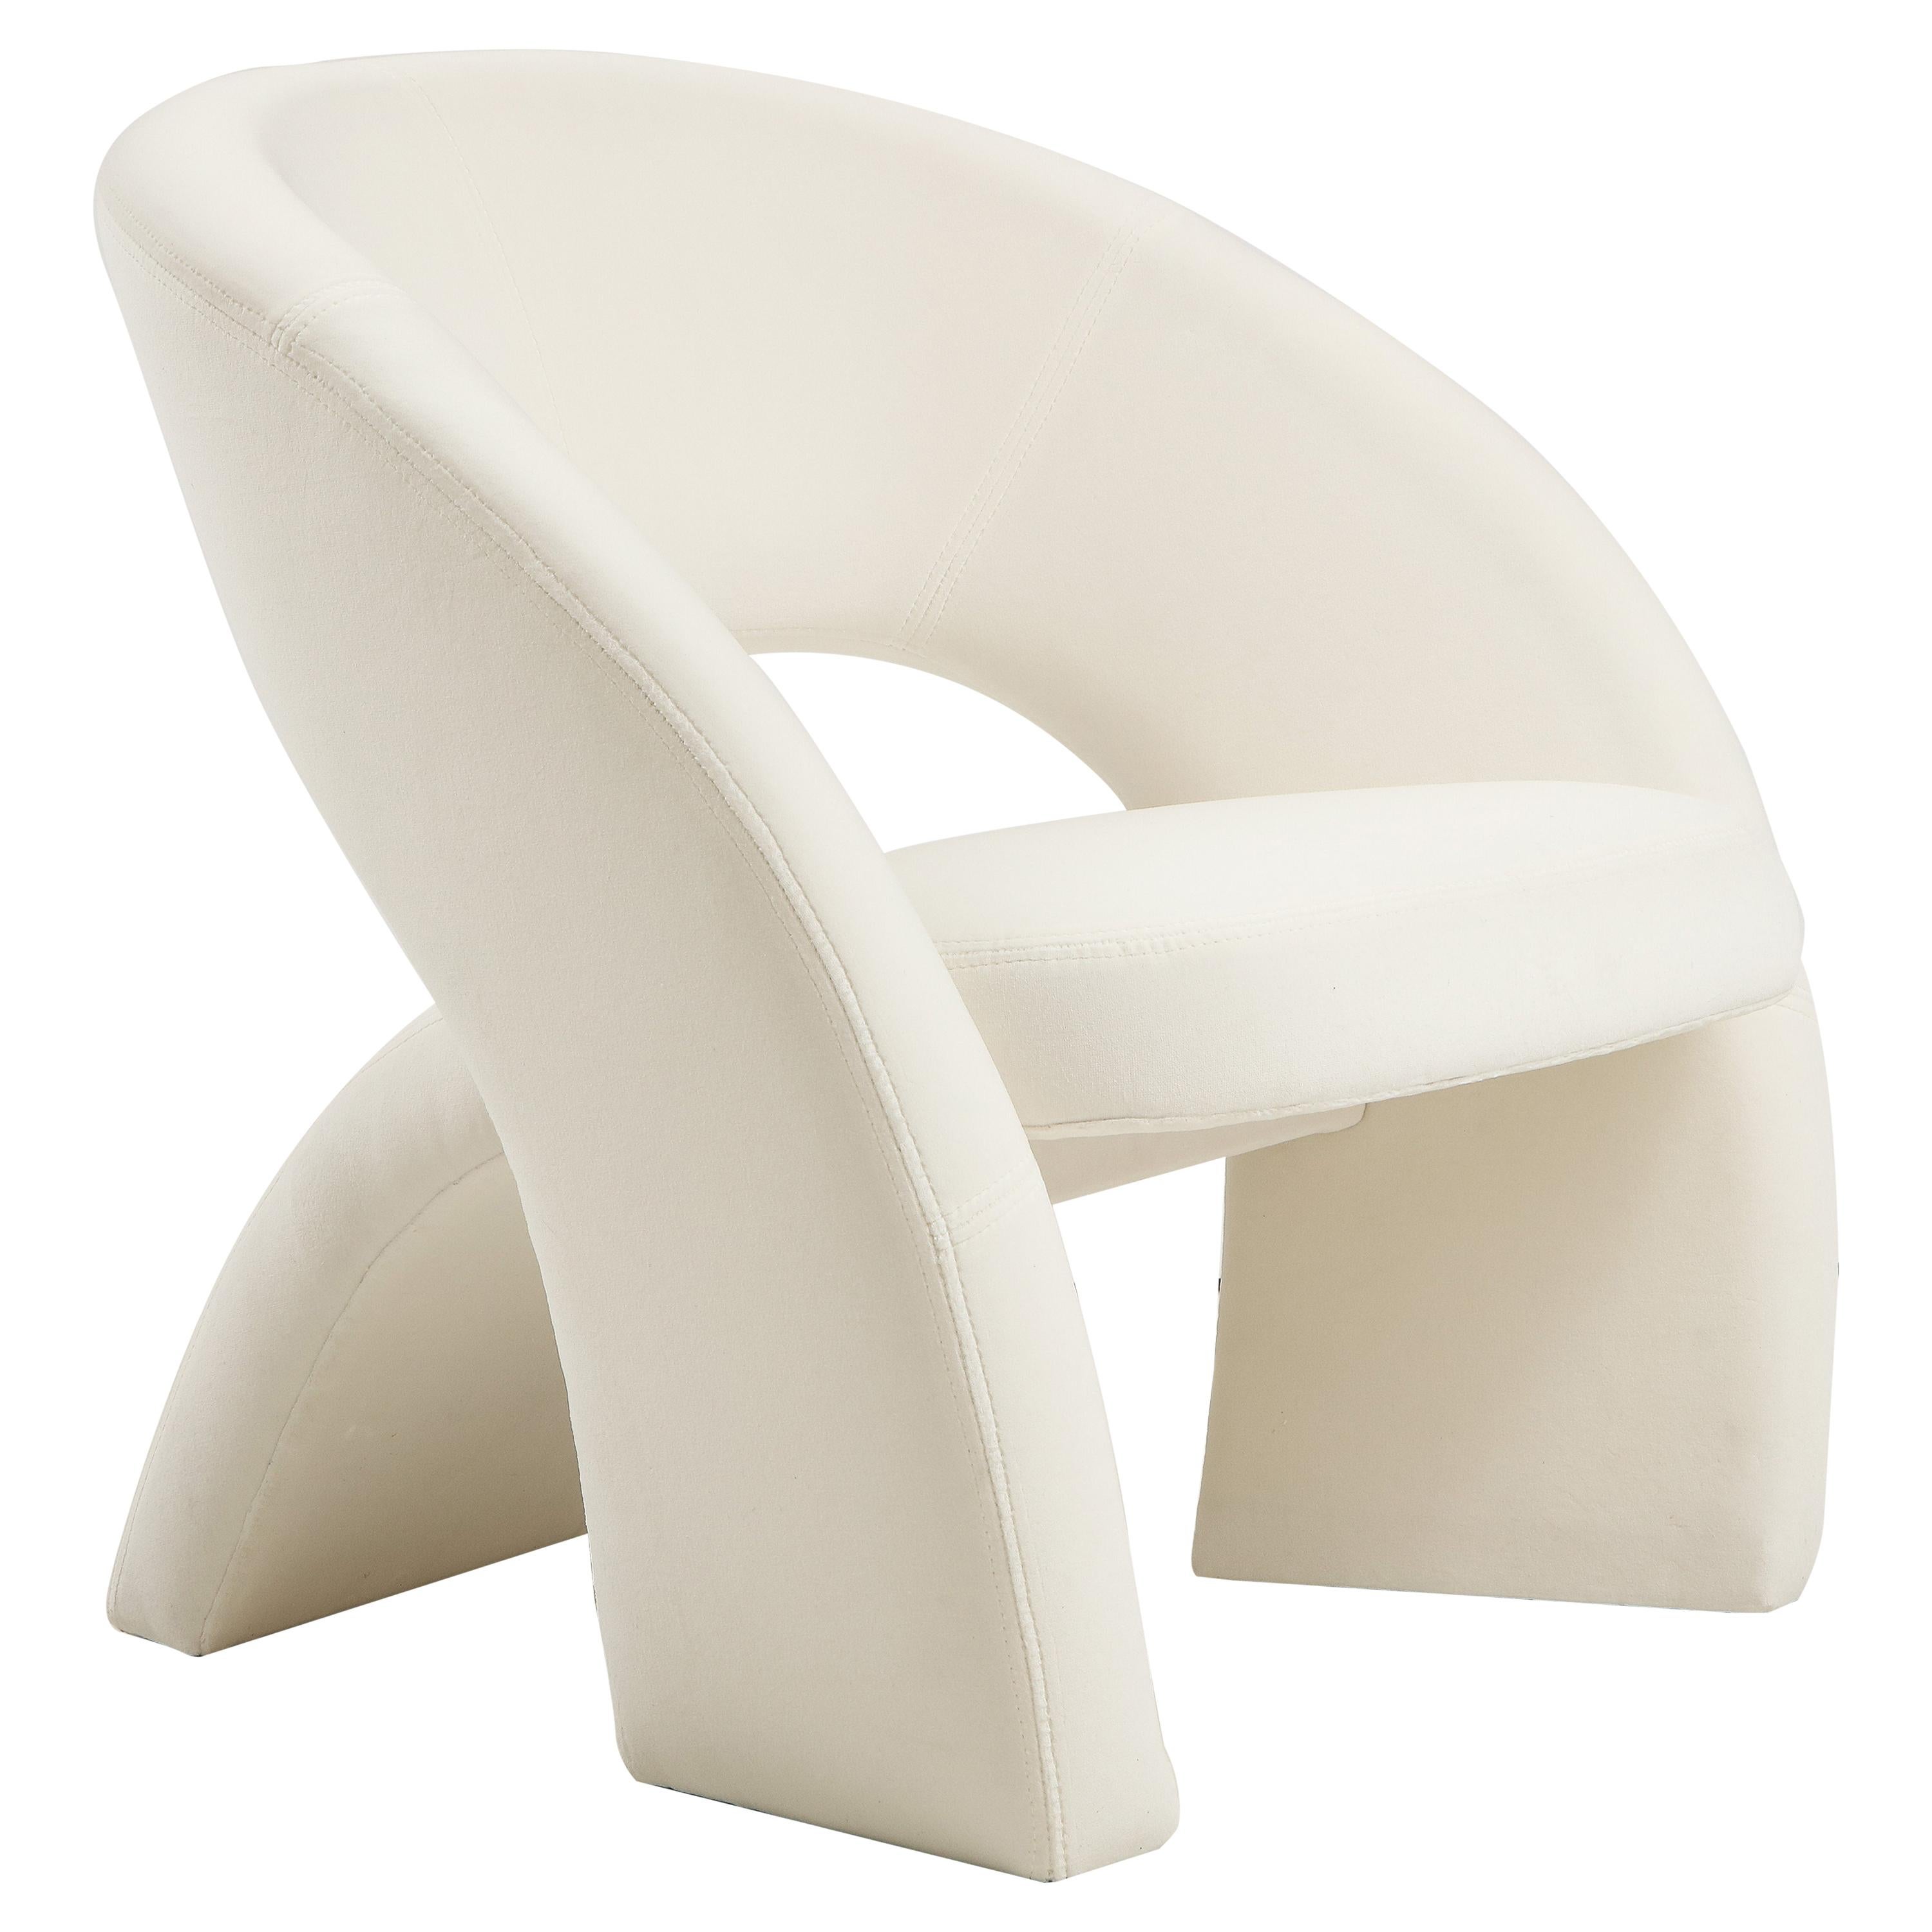 LunaSedia' Sculpted Armchair For Sale at 1stDibs